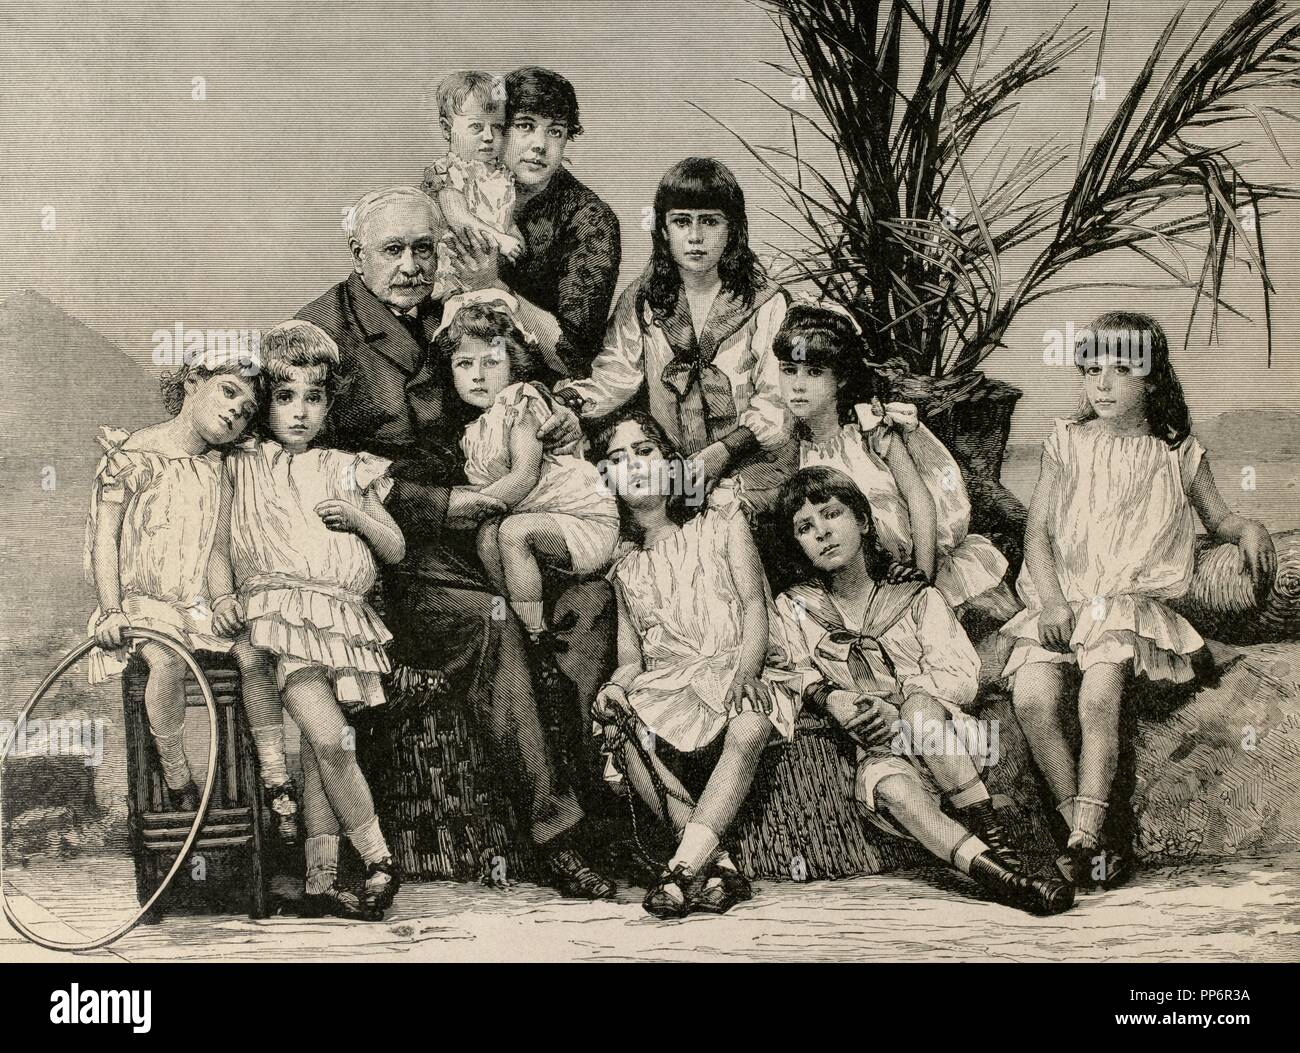 Ferdinand de Lesseps (1805-1894). French diplomat and entrepreneur. Lesseps with his family. Engraving in The Artistic Illustration, 1886. Stock Photo